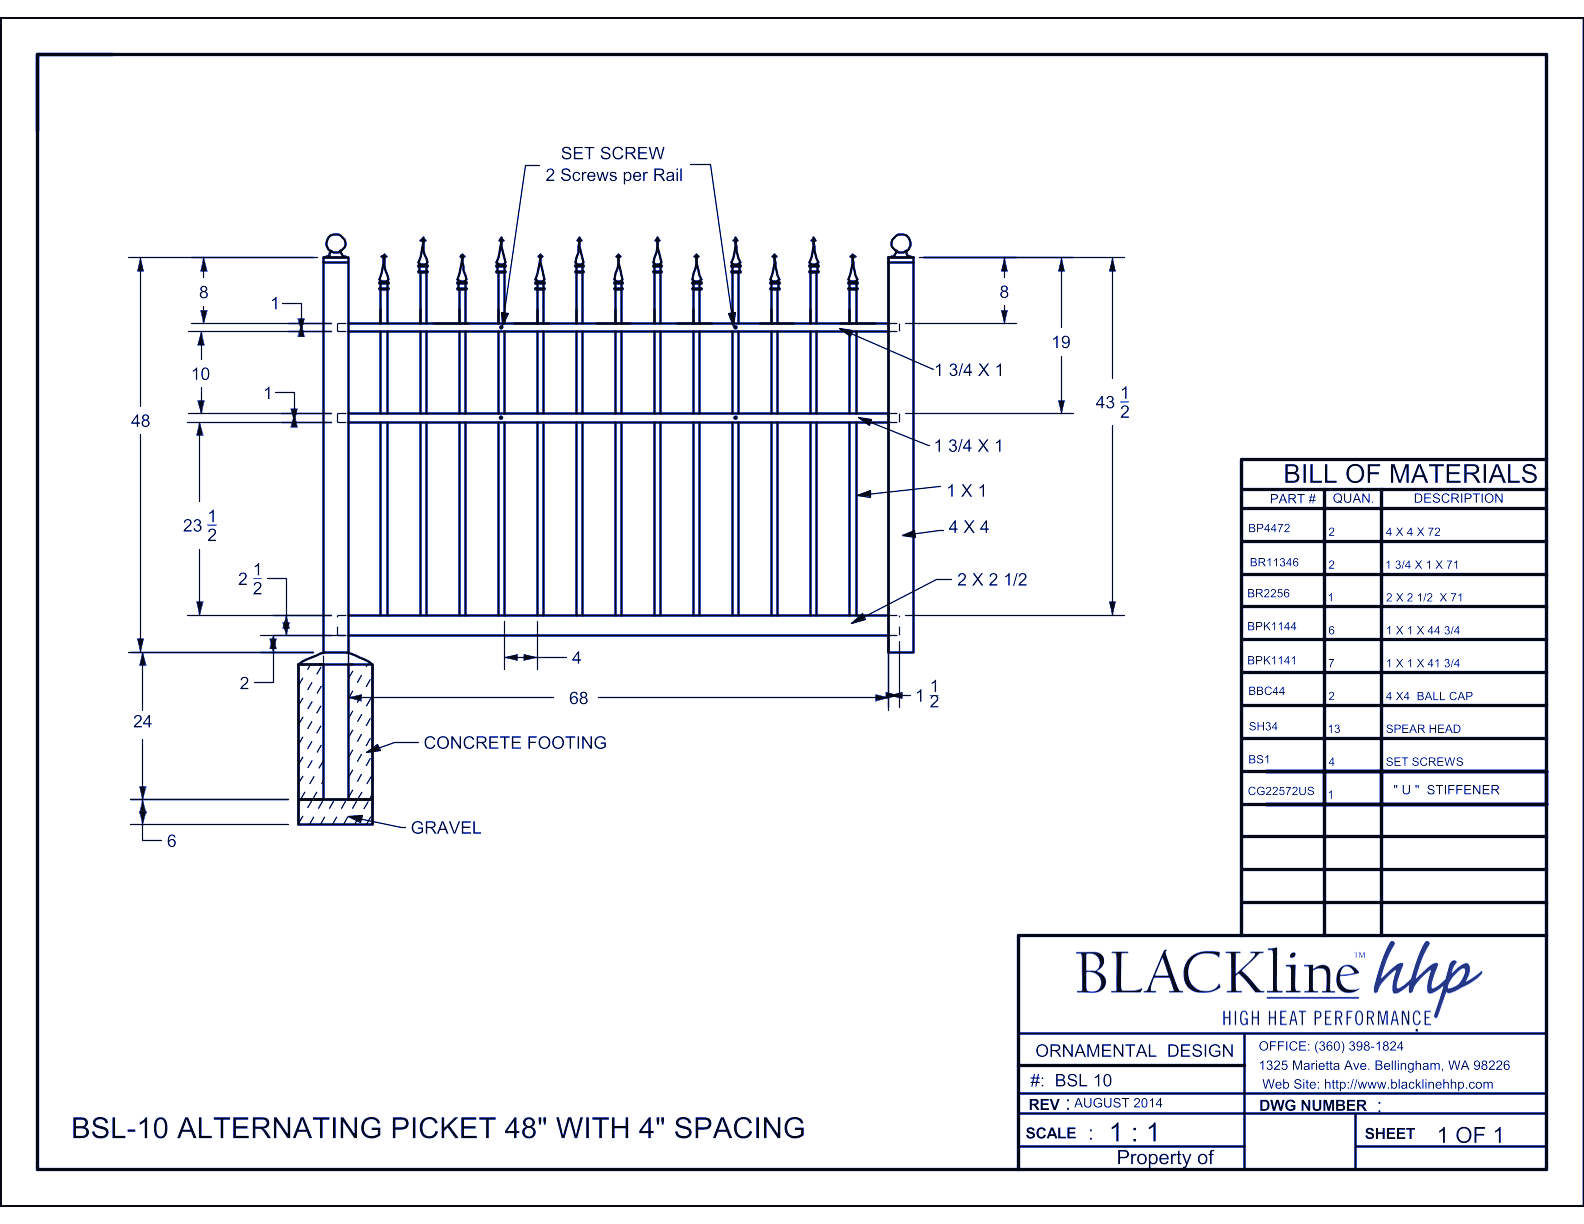 BSL-10: Alternating Picket 48" with 4" Spacing